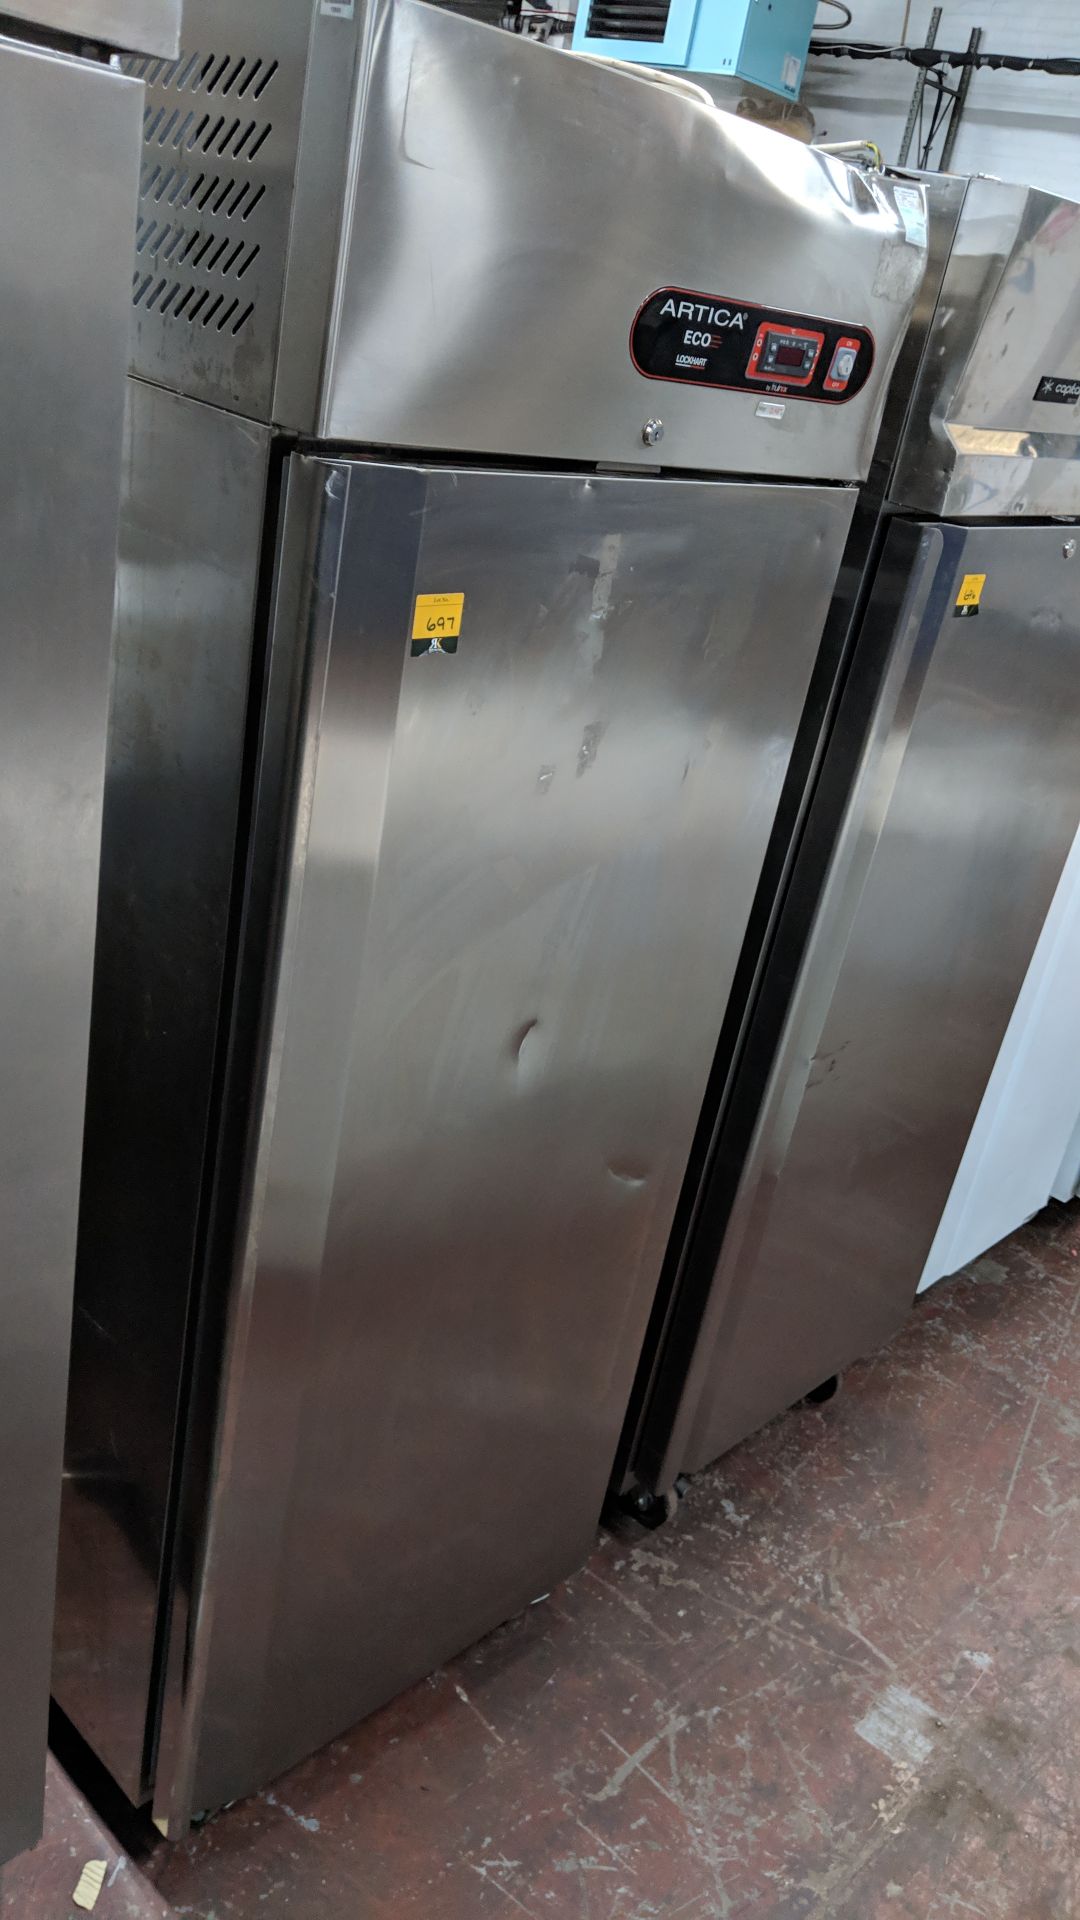 Lockhart Artico Eco tall stainless steel fridge IMPORTANT: Please remember goods successfully bid